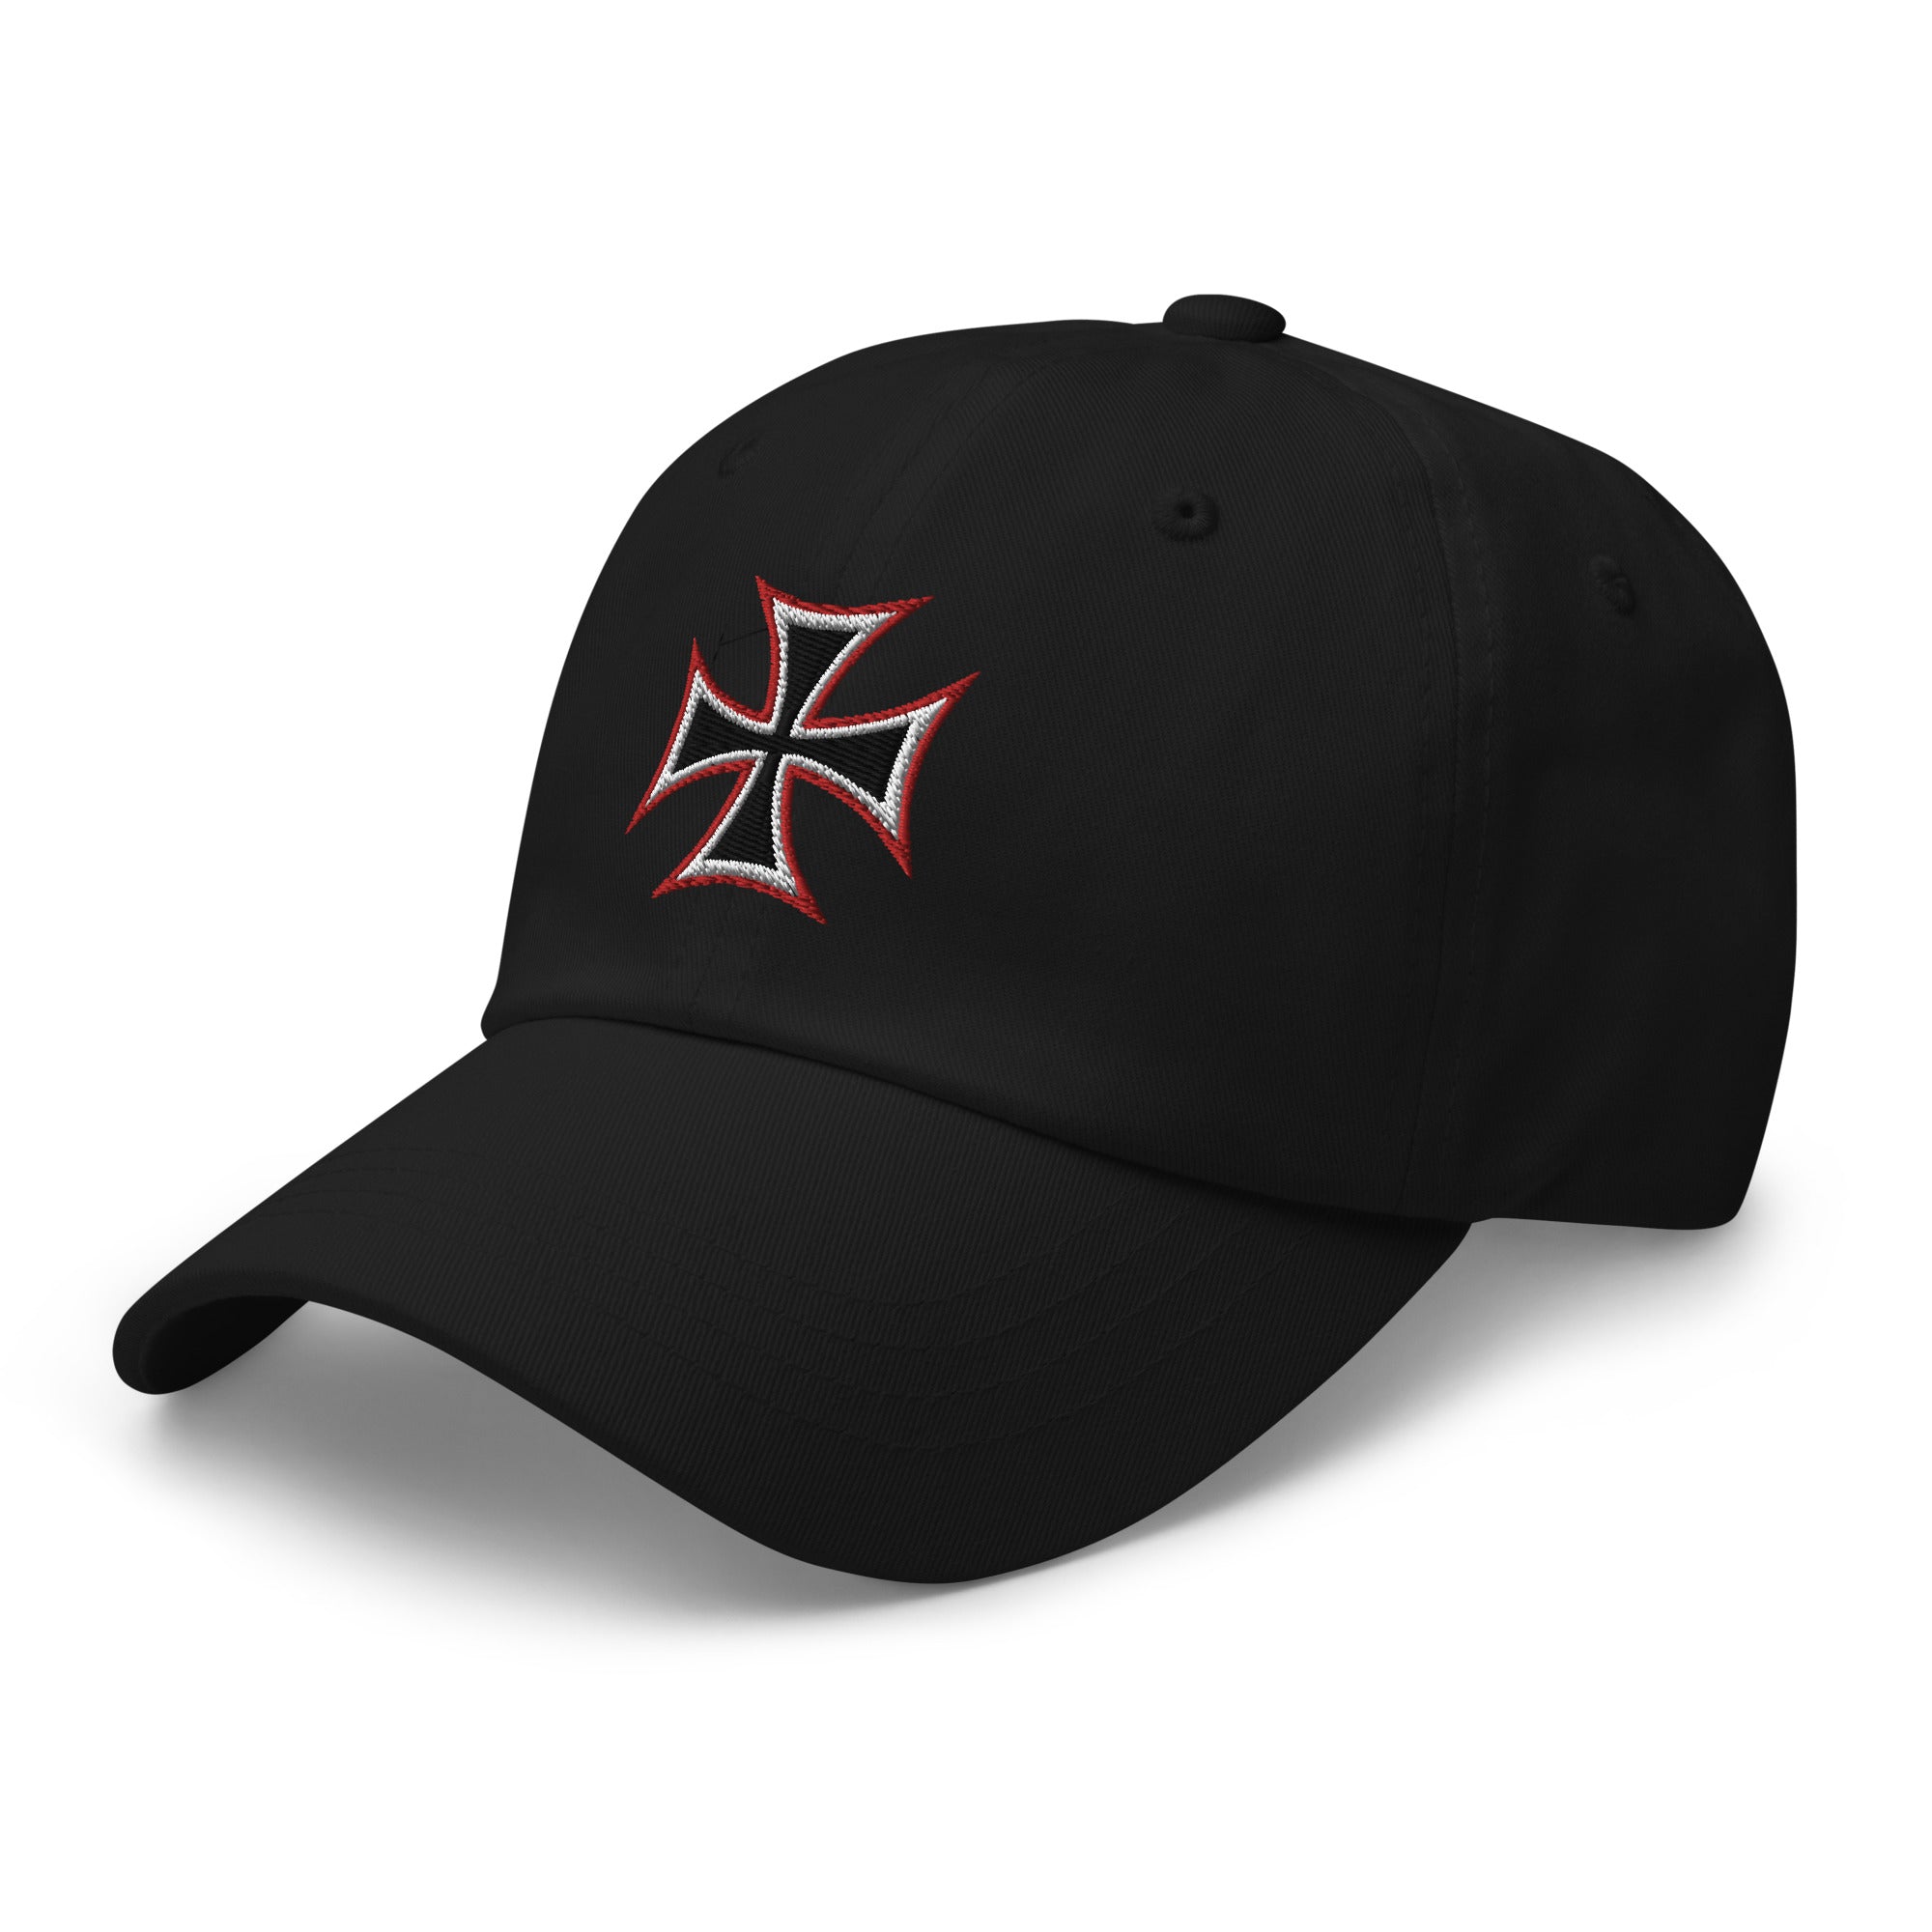 WWII Style Iron Cross Occult Symbol Embroidered Baseball Cap Dad hat - Edge of Life Designs